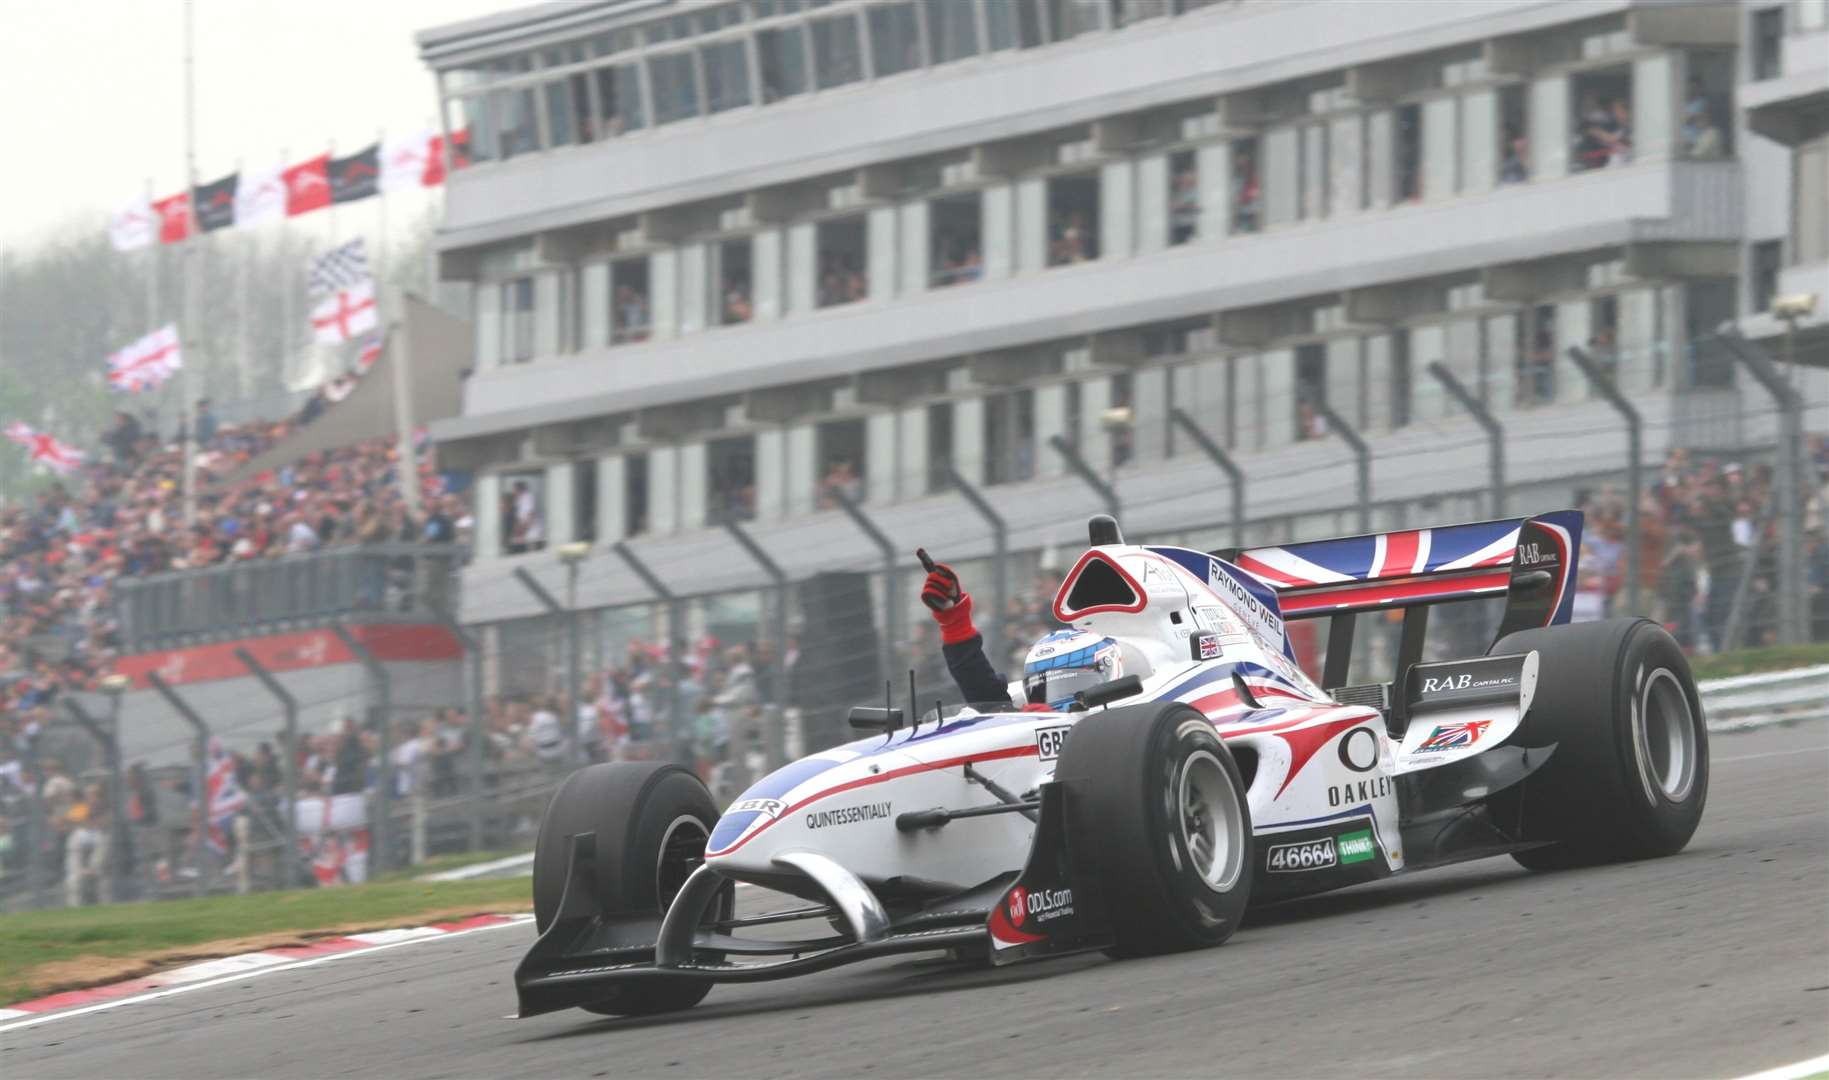 Team GB and driver Robbie Kerr made history in 2007 when they became the first squad to win an A1GP race on home soil. Picture: Kerry Dunlop